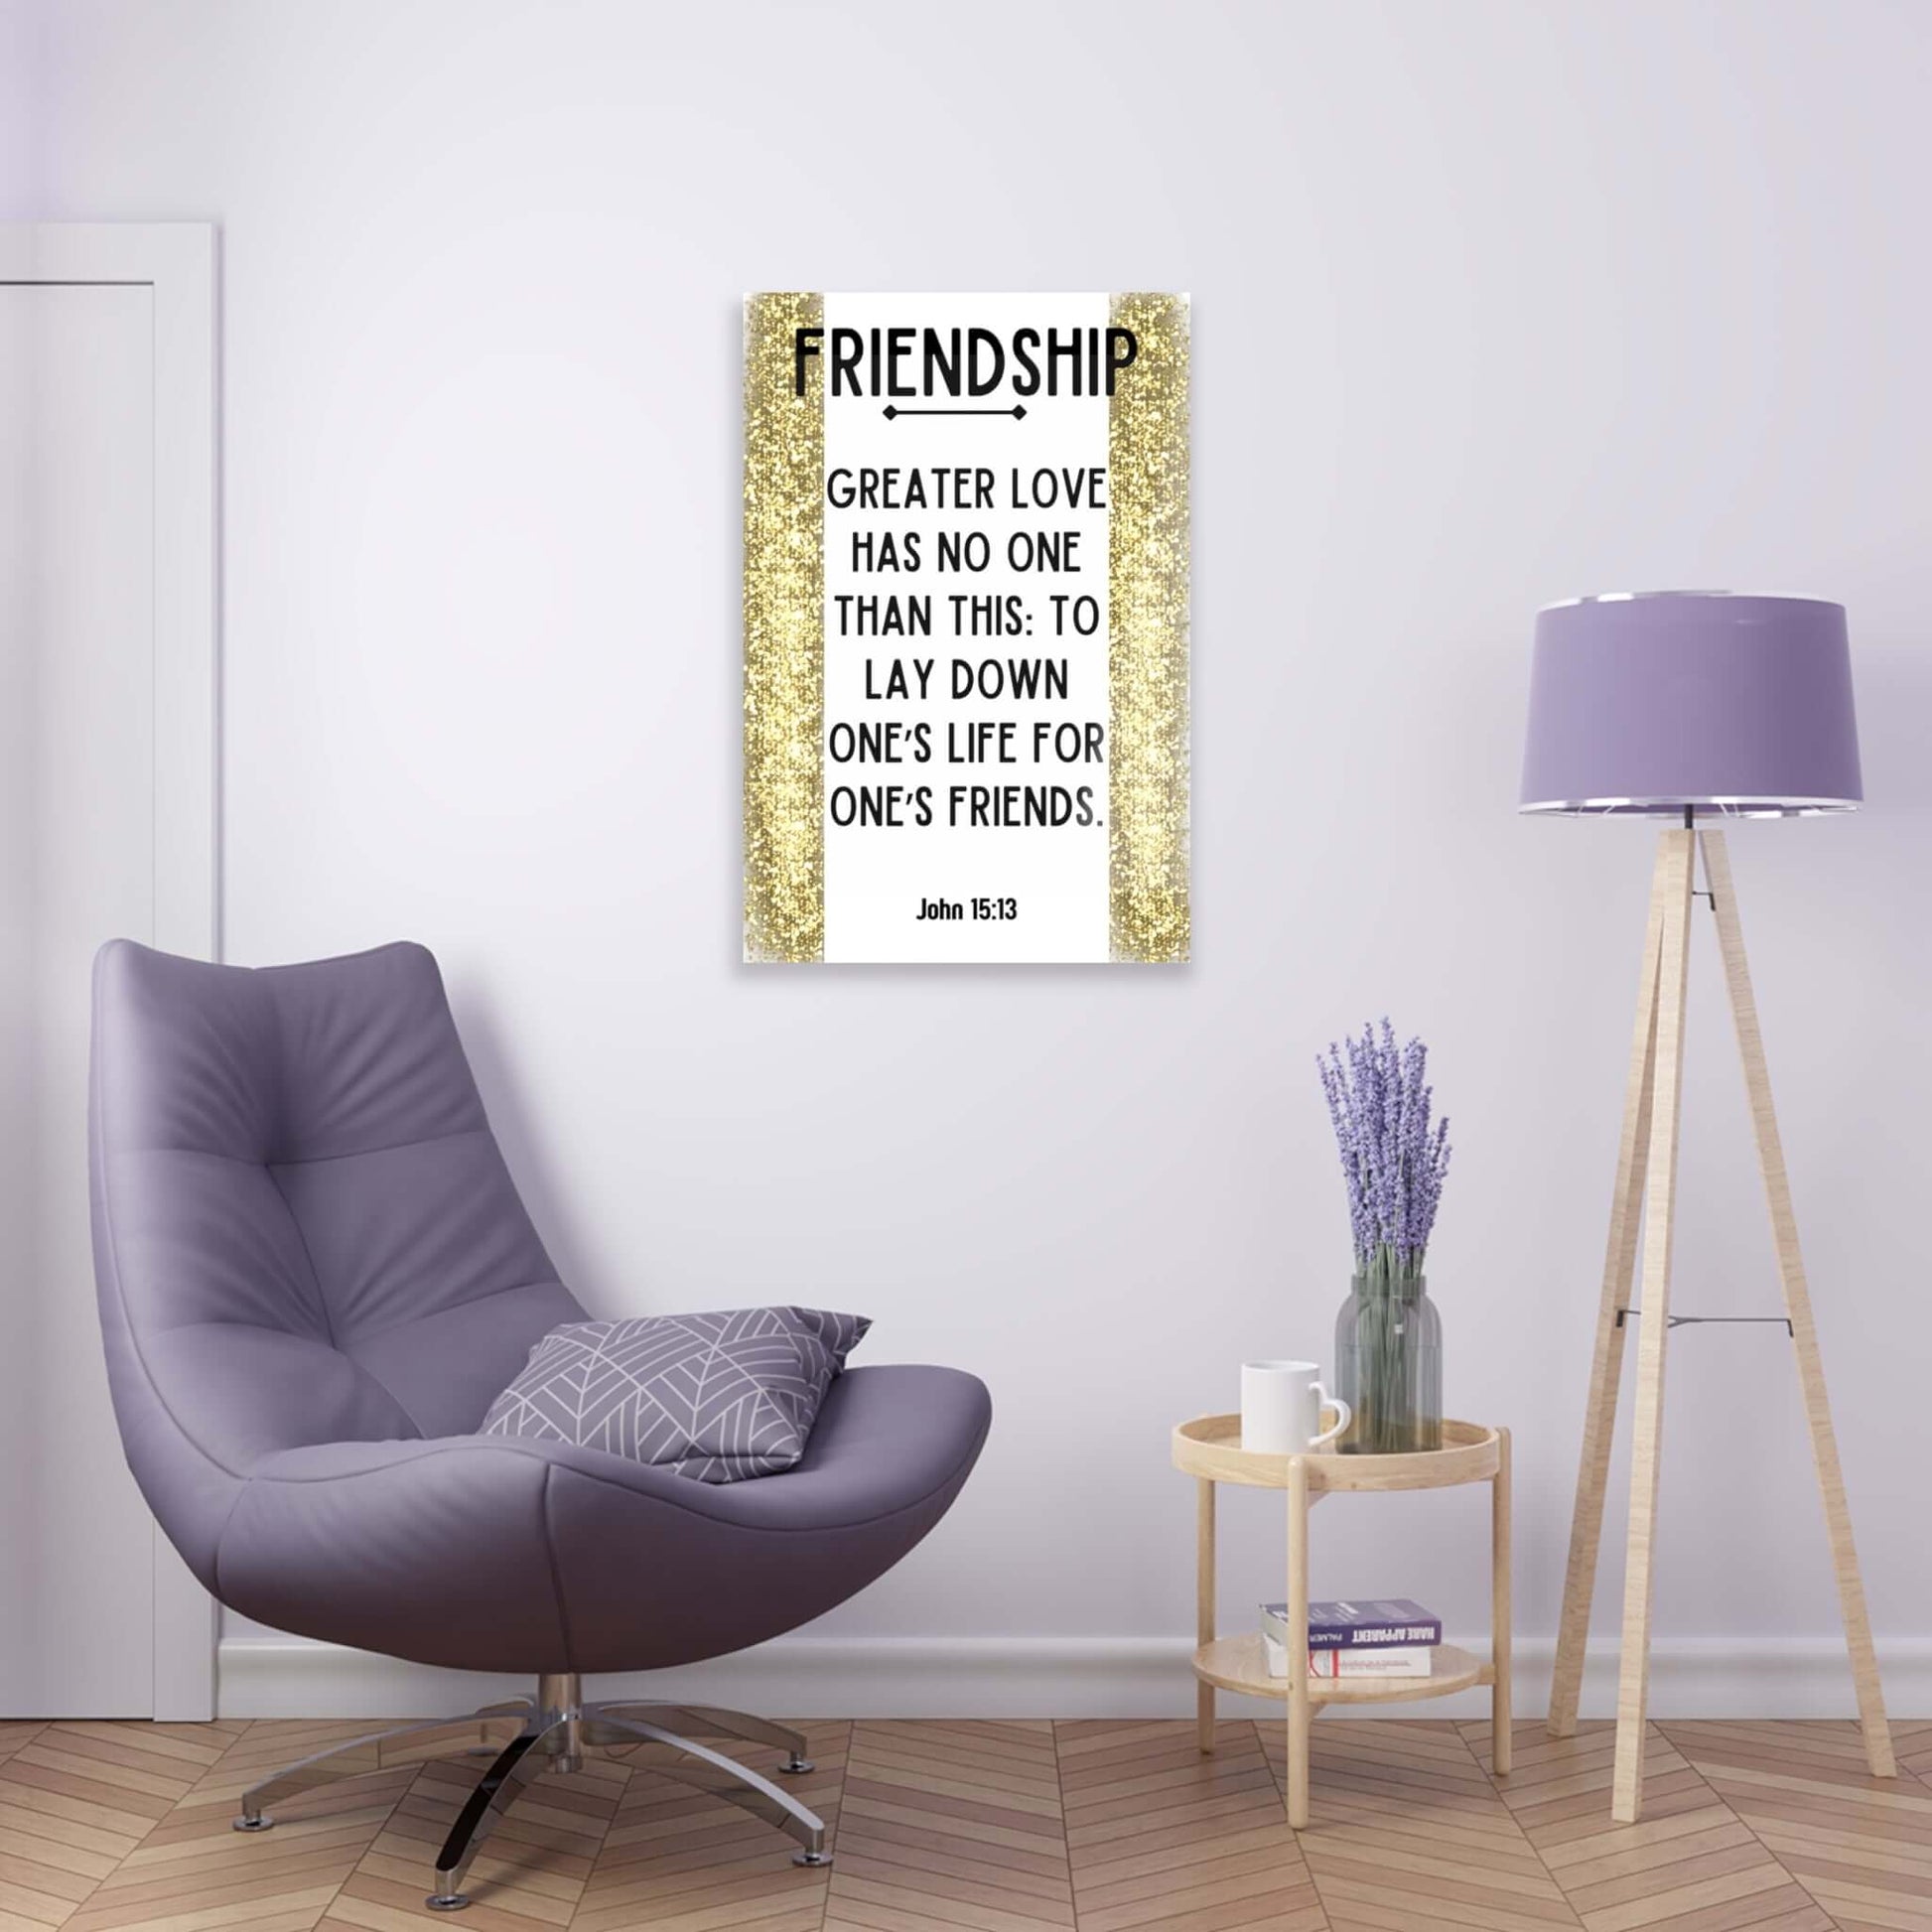 Gold Wall Decor: Stunning Acrylic Print with Inspiring Scripture | Art & Wall Decor,Assembled in the USA,Assembled in USA,Decor,Home & Living,Home Decor,Indoor,Made in the USA,Made in USA,Poster